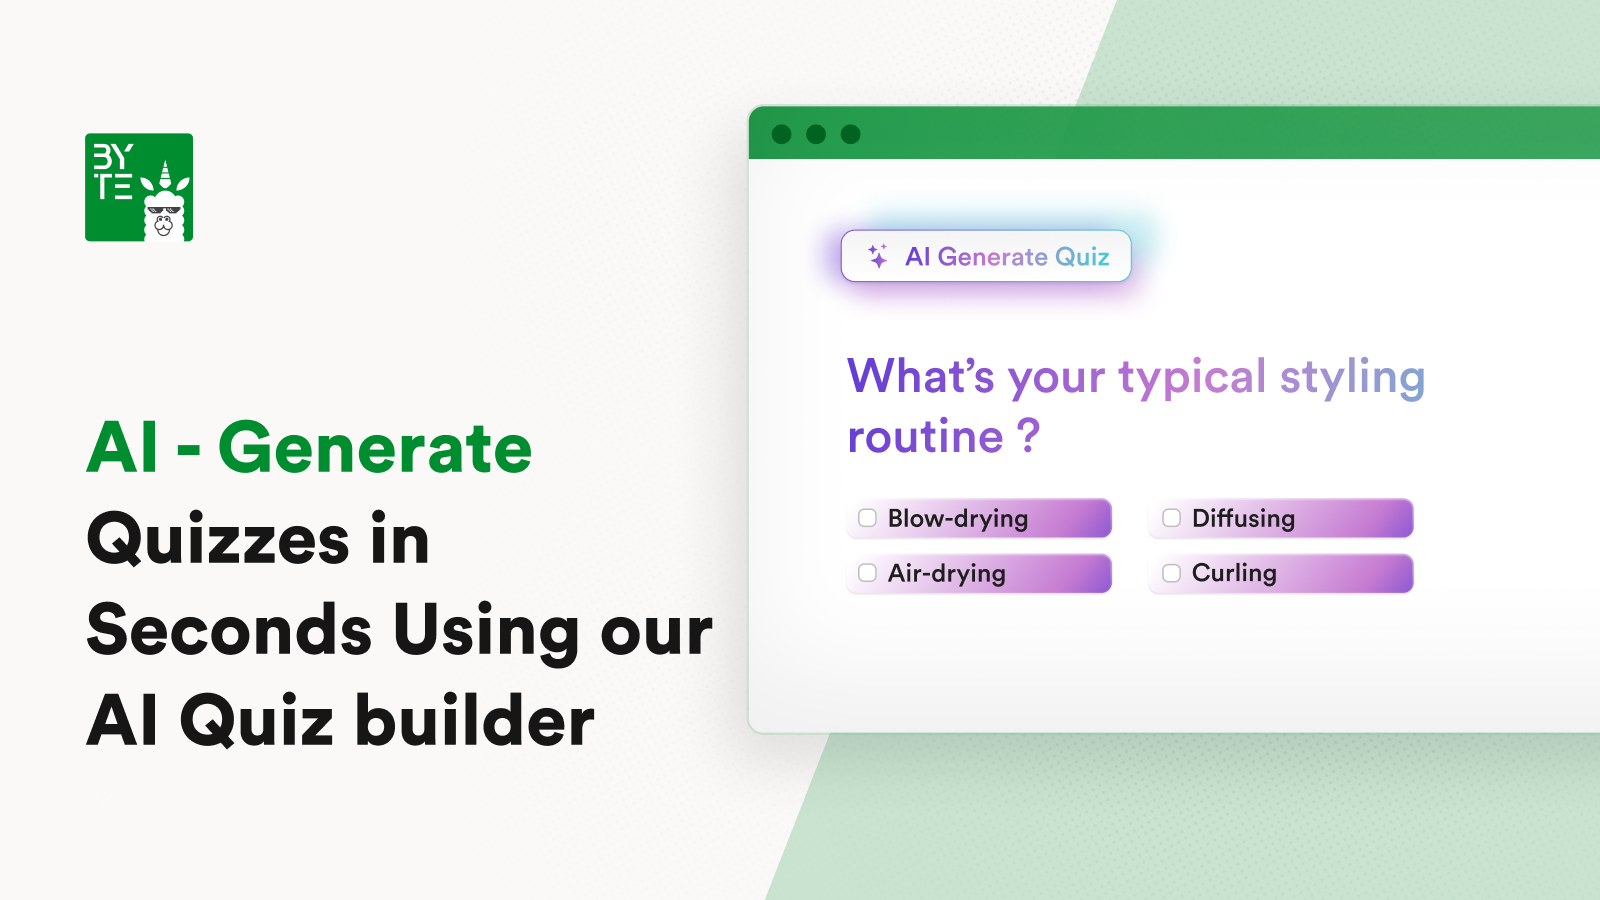 AI quiz builder, templates & 24/7 assistance to launch quickly!